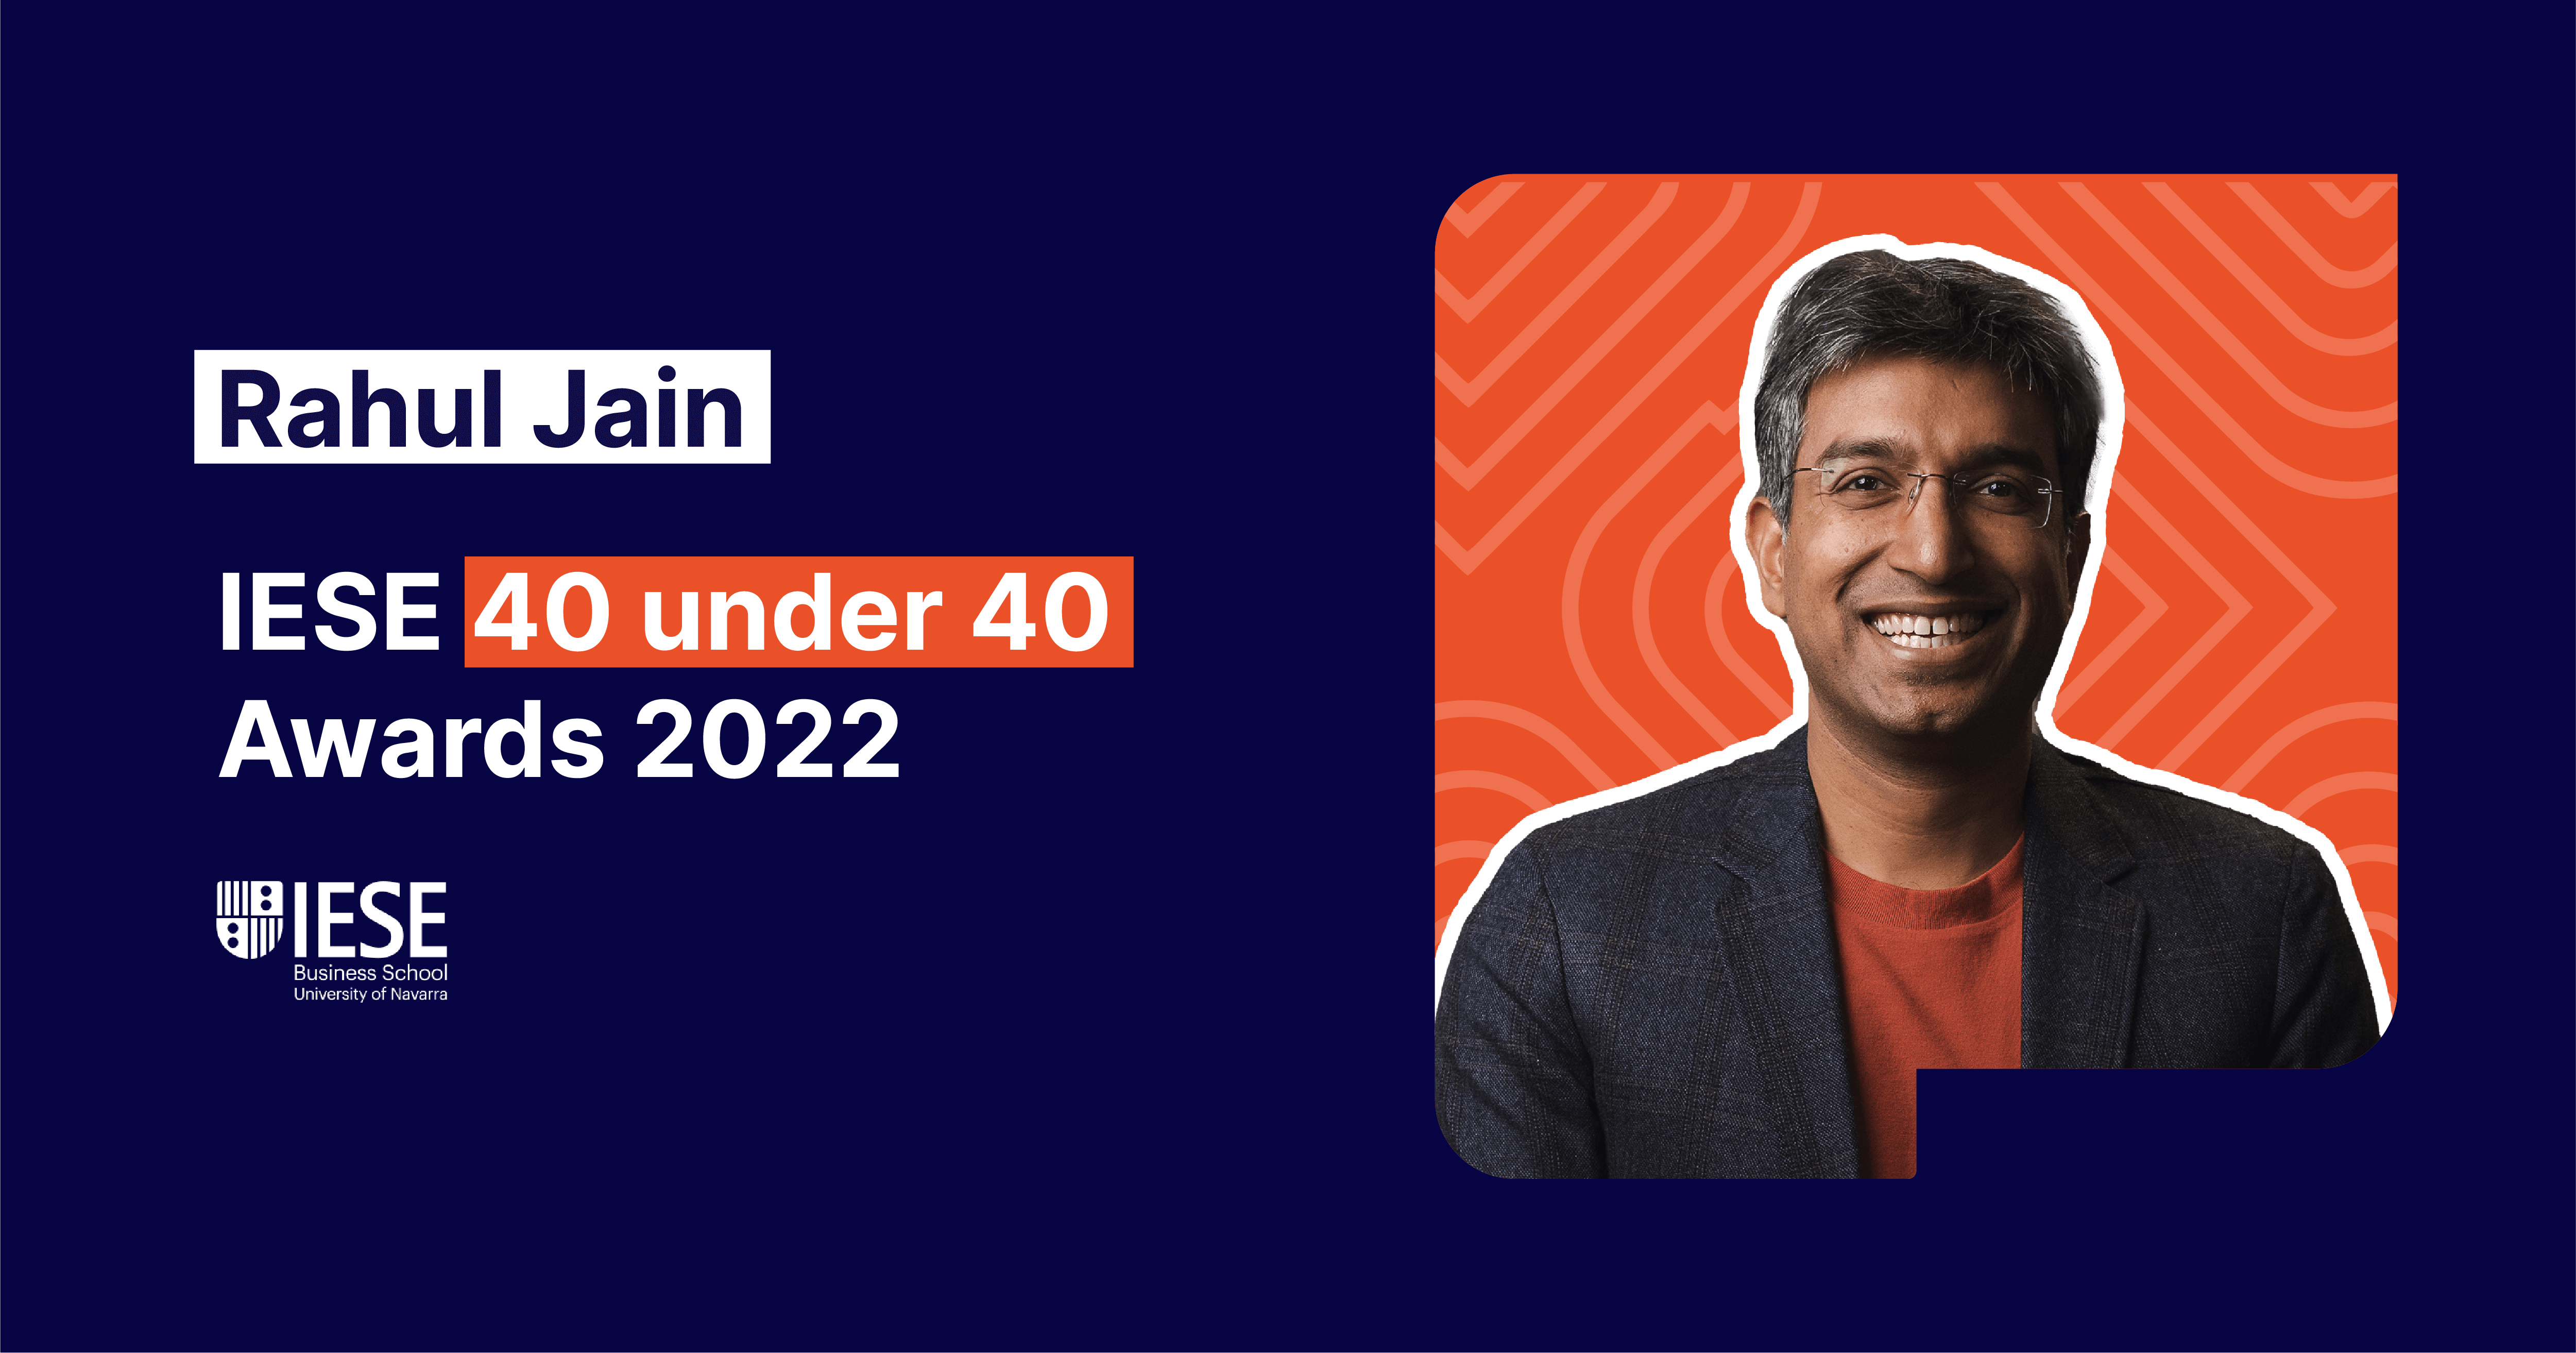 Rahul Jain, co-founder and CEO of Peach Payments, named an IESE 40under40 best entrepreneur for 2022